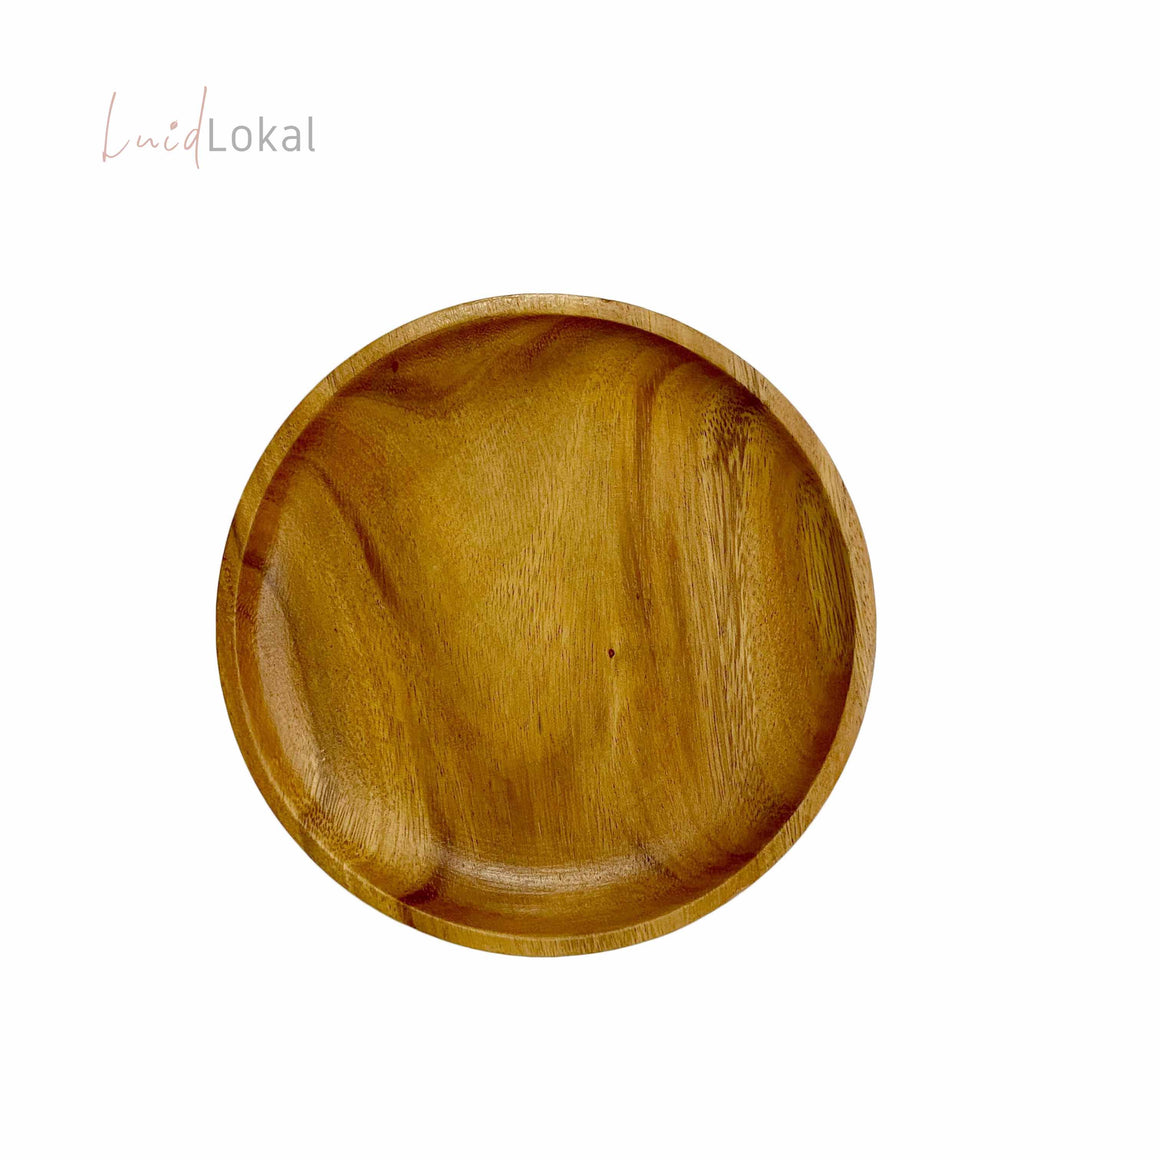 Luid Lokal Plate Holiday Bundle Set Plates Round Plate Charger Plate Tablescape Decoration Christmas Gift Acacia Wood